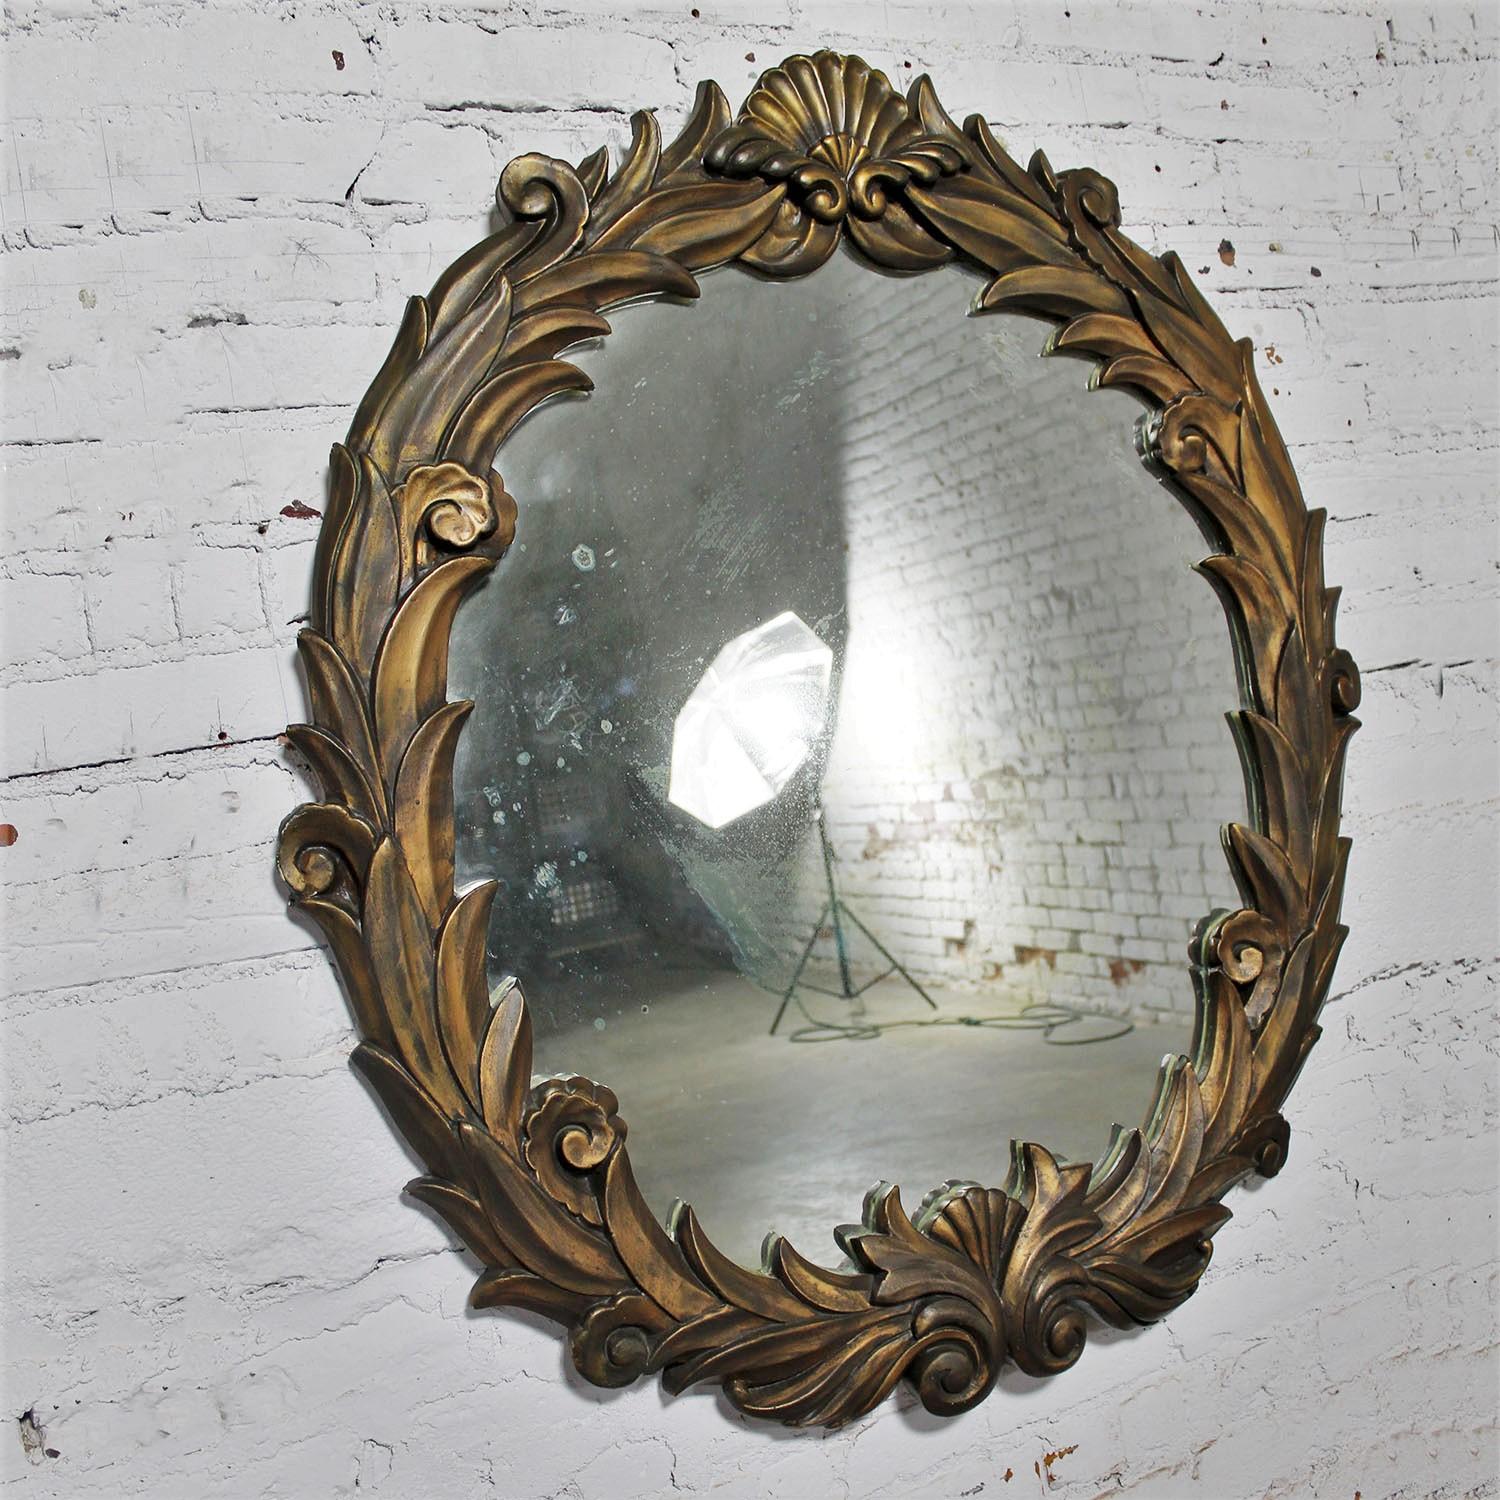 Fabulous Antique Art Deco Hollywood Regency Neo Classic Revival style foliate large scale round plaster mirror in the style of Serge Roche. Beautiful condition, keeping in mind that this is vintage and not new so will have signs of use and wear even